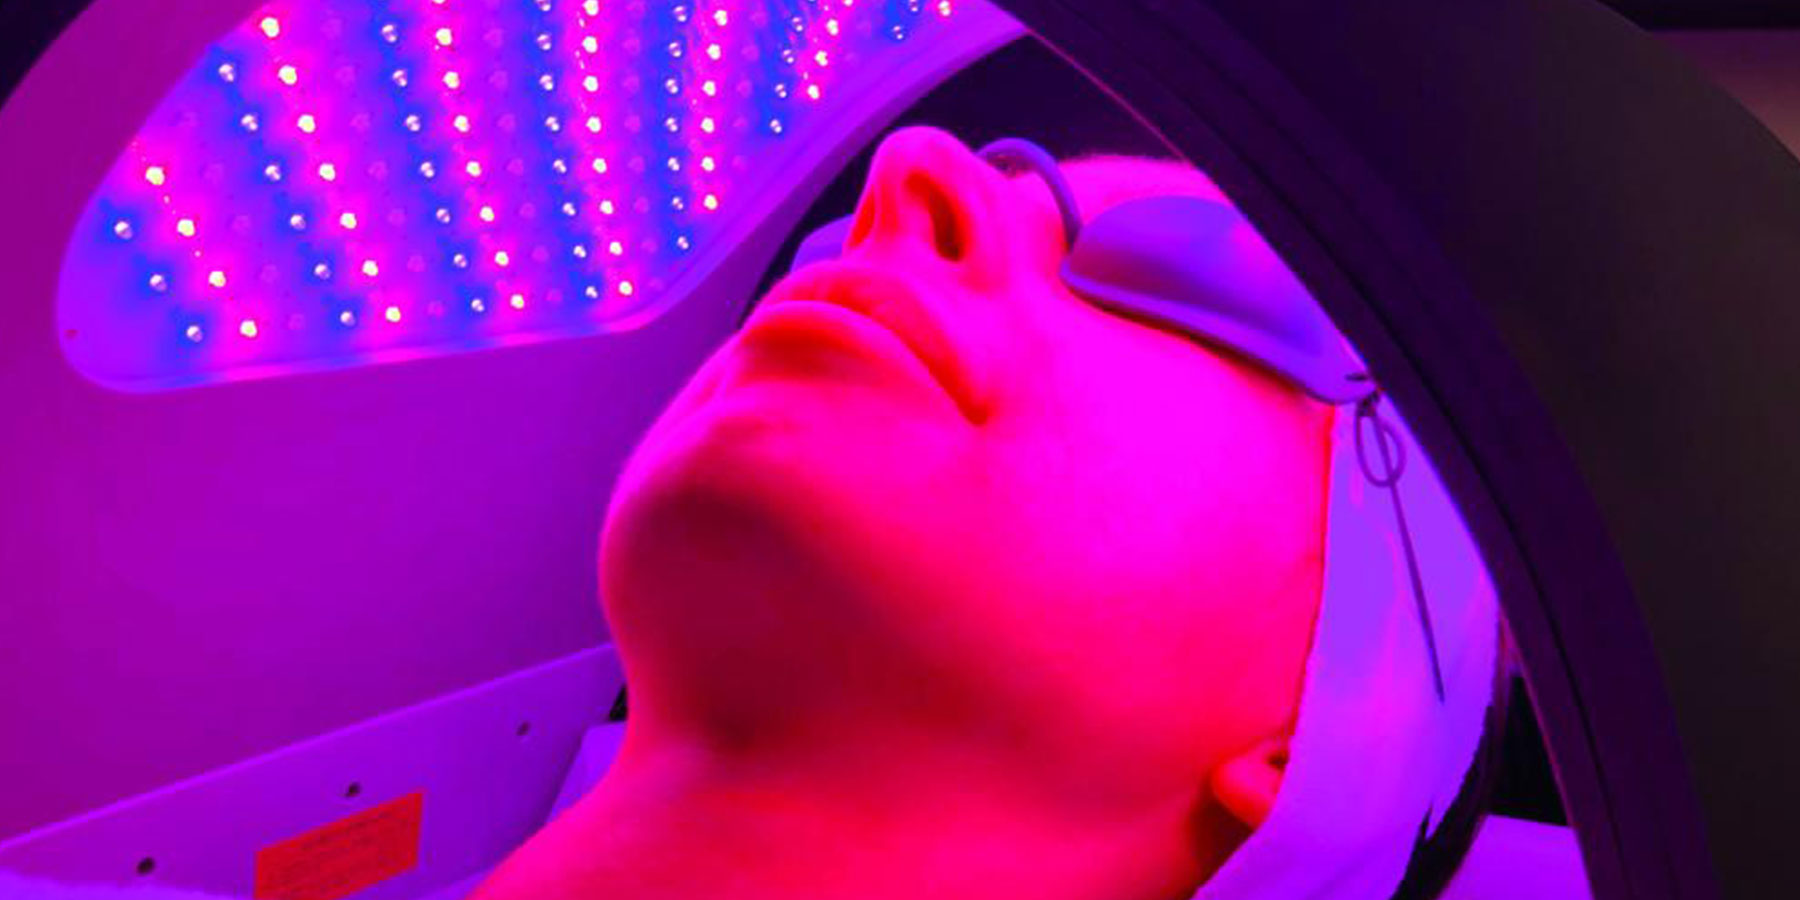 Demalux Flex LED Light Therapy - Illuminate Your Skin's Beauty